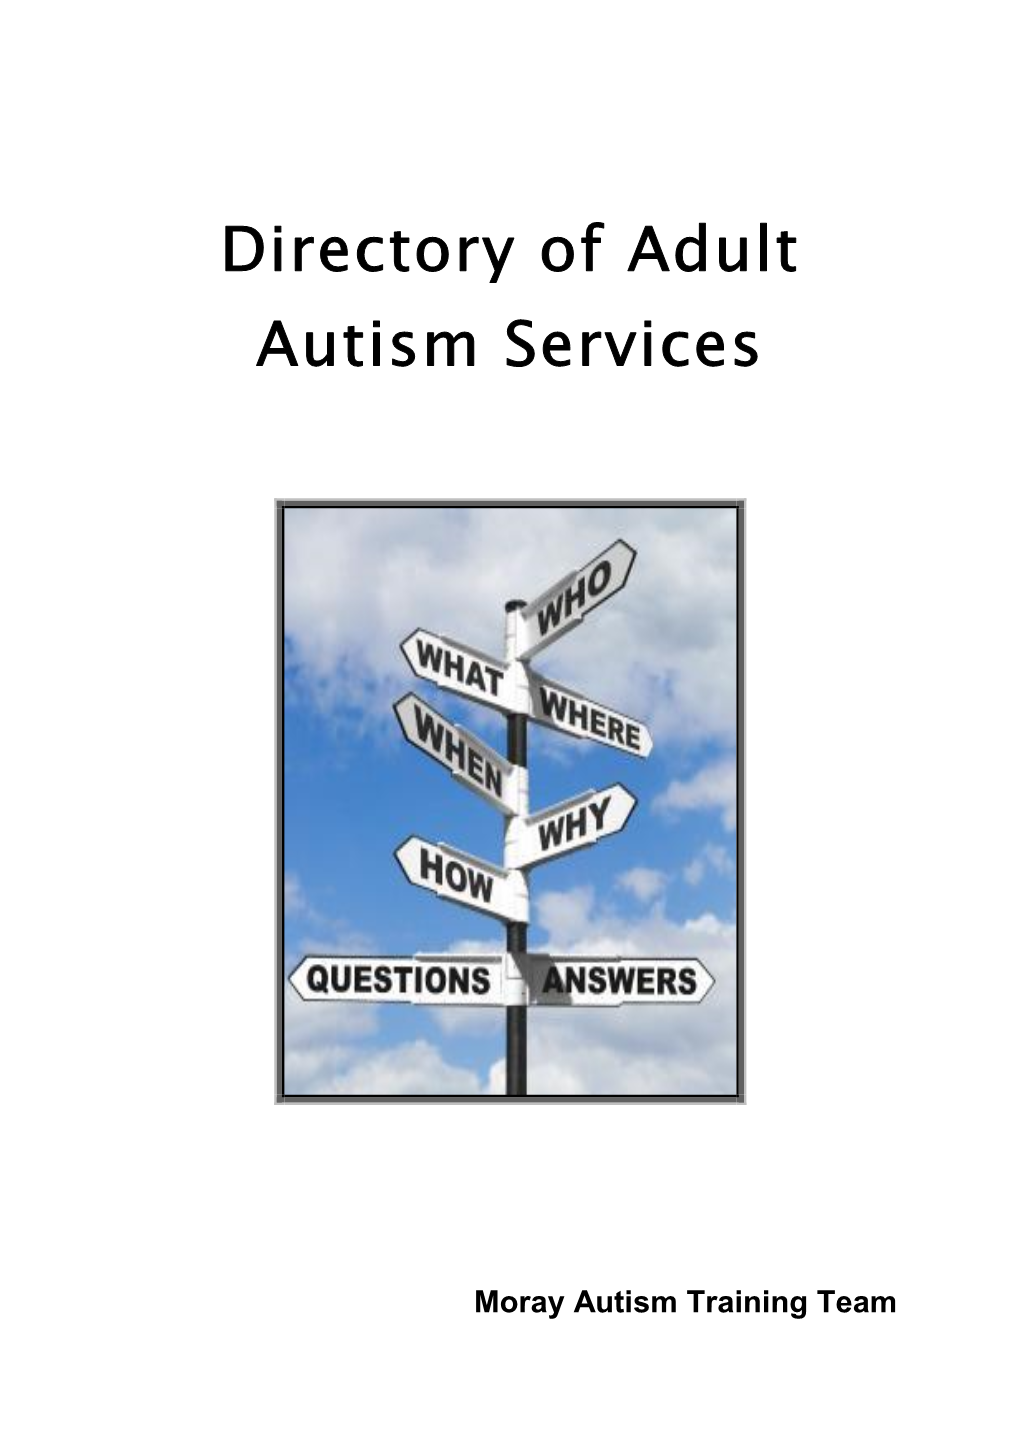 Directory of Adult Autism Services